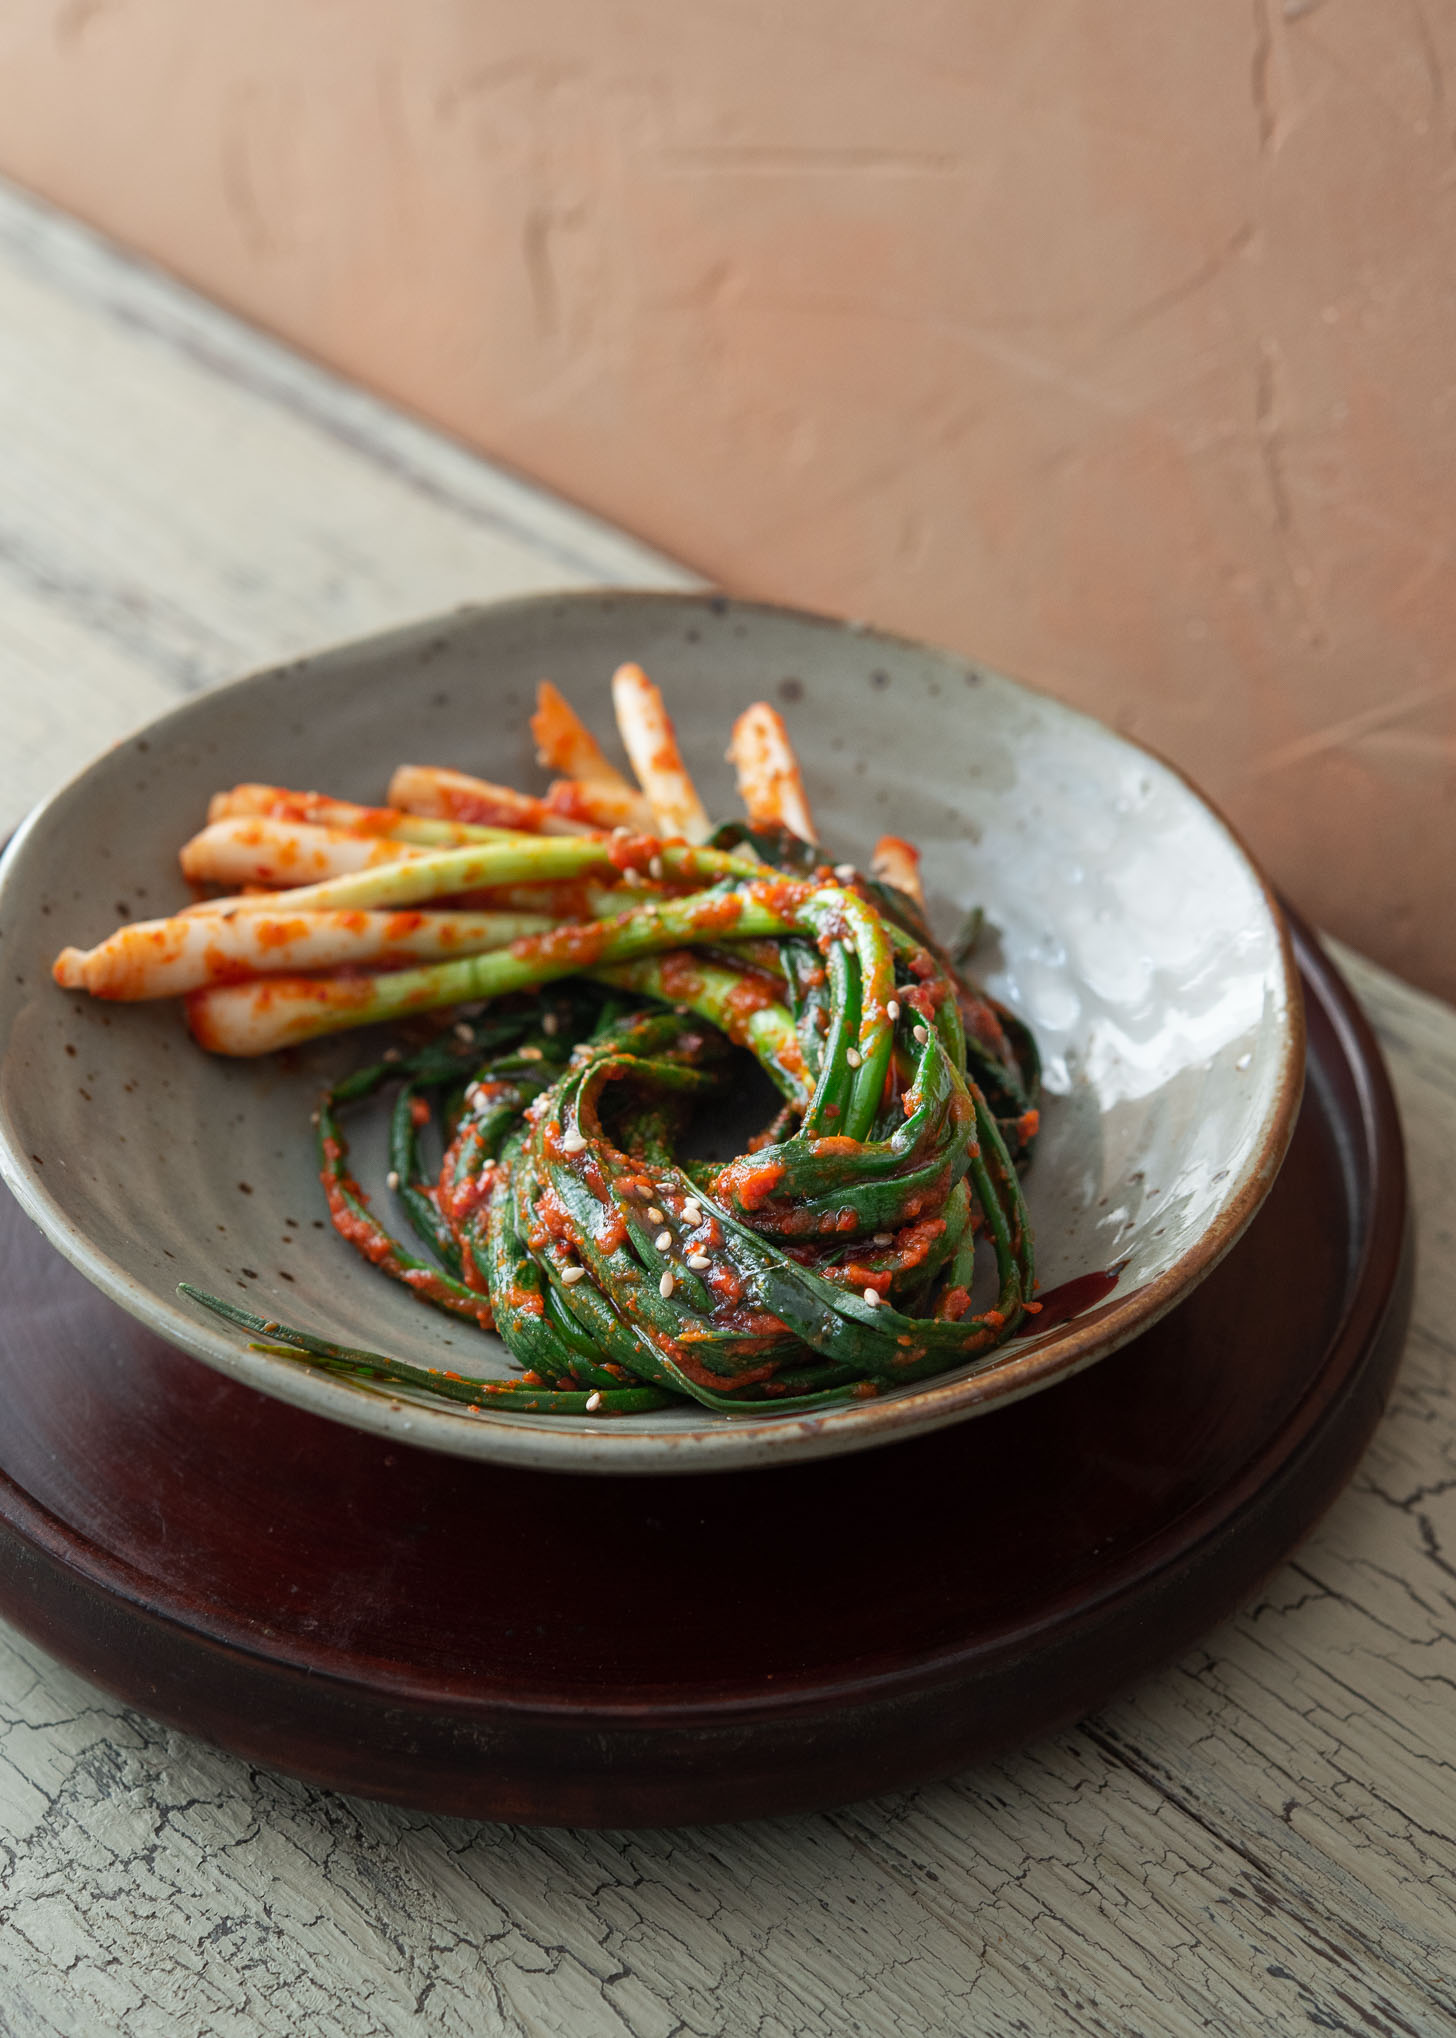 A bundle of Pa Kimchi is twirled in a small serving dish.